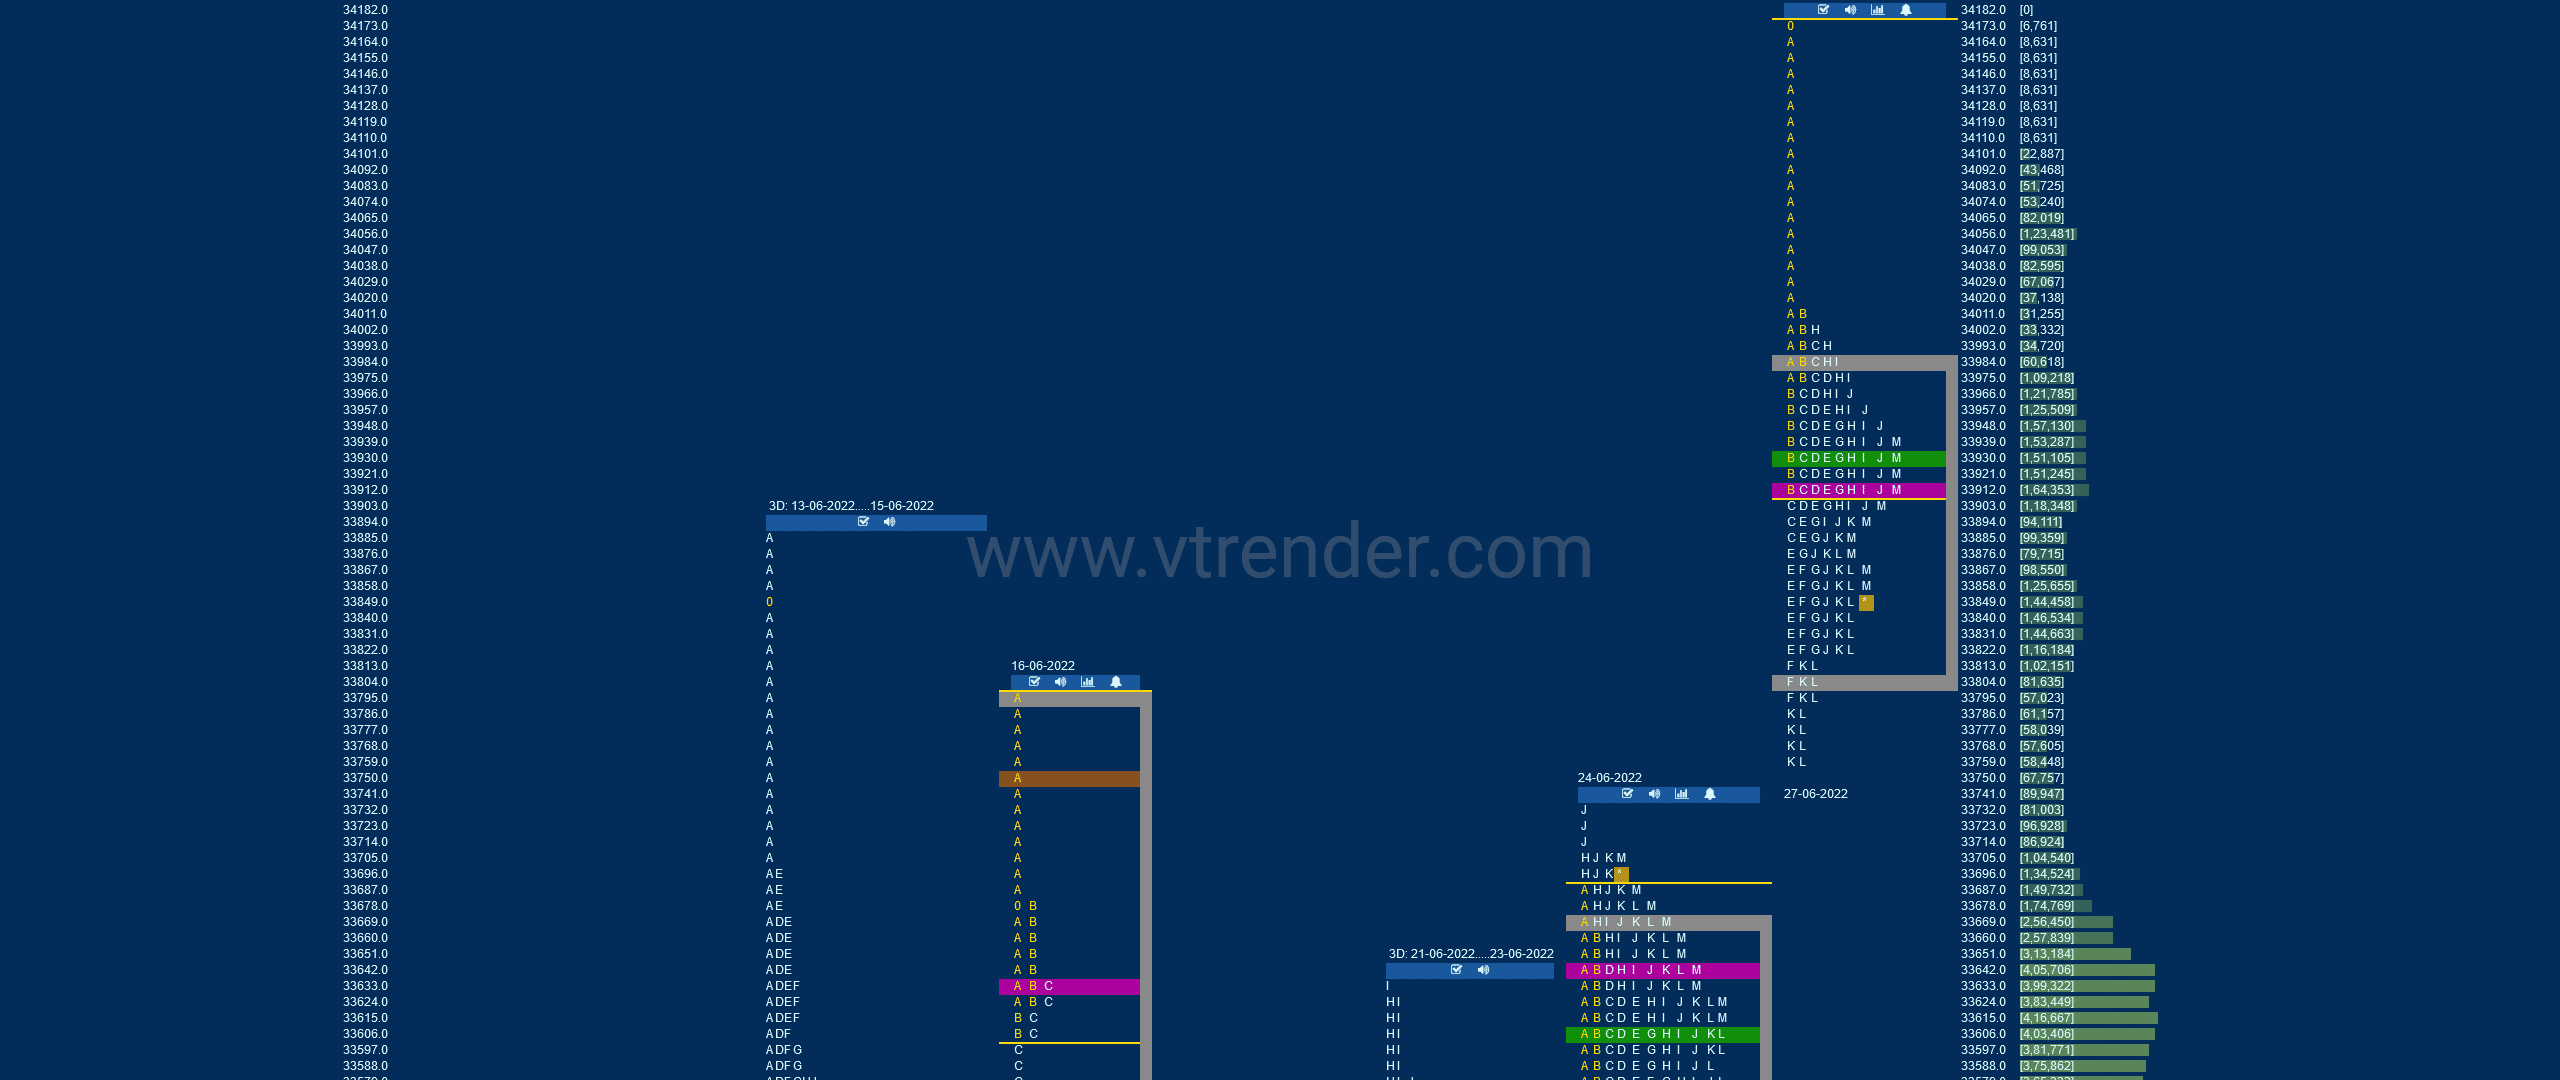 Bnf 19 Market Profile Analysis Dated 27Th Jun 2022 Banknifty Futures, Charts, Day Trading, Intraday Trading, Intraday Trading Strategies, Market Profile, Market Profile Trading Strategies, Nifty Futures, Order Flow Analysis, Support And Resistance, Technical Analysis, Trading Strategies, Volume Profile Trading